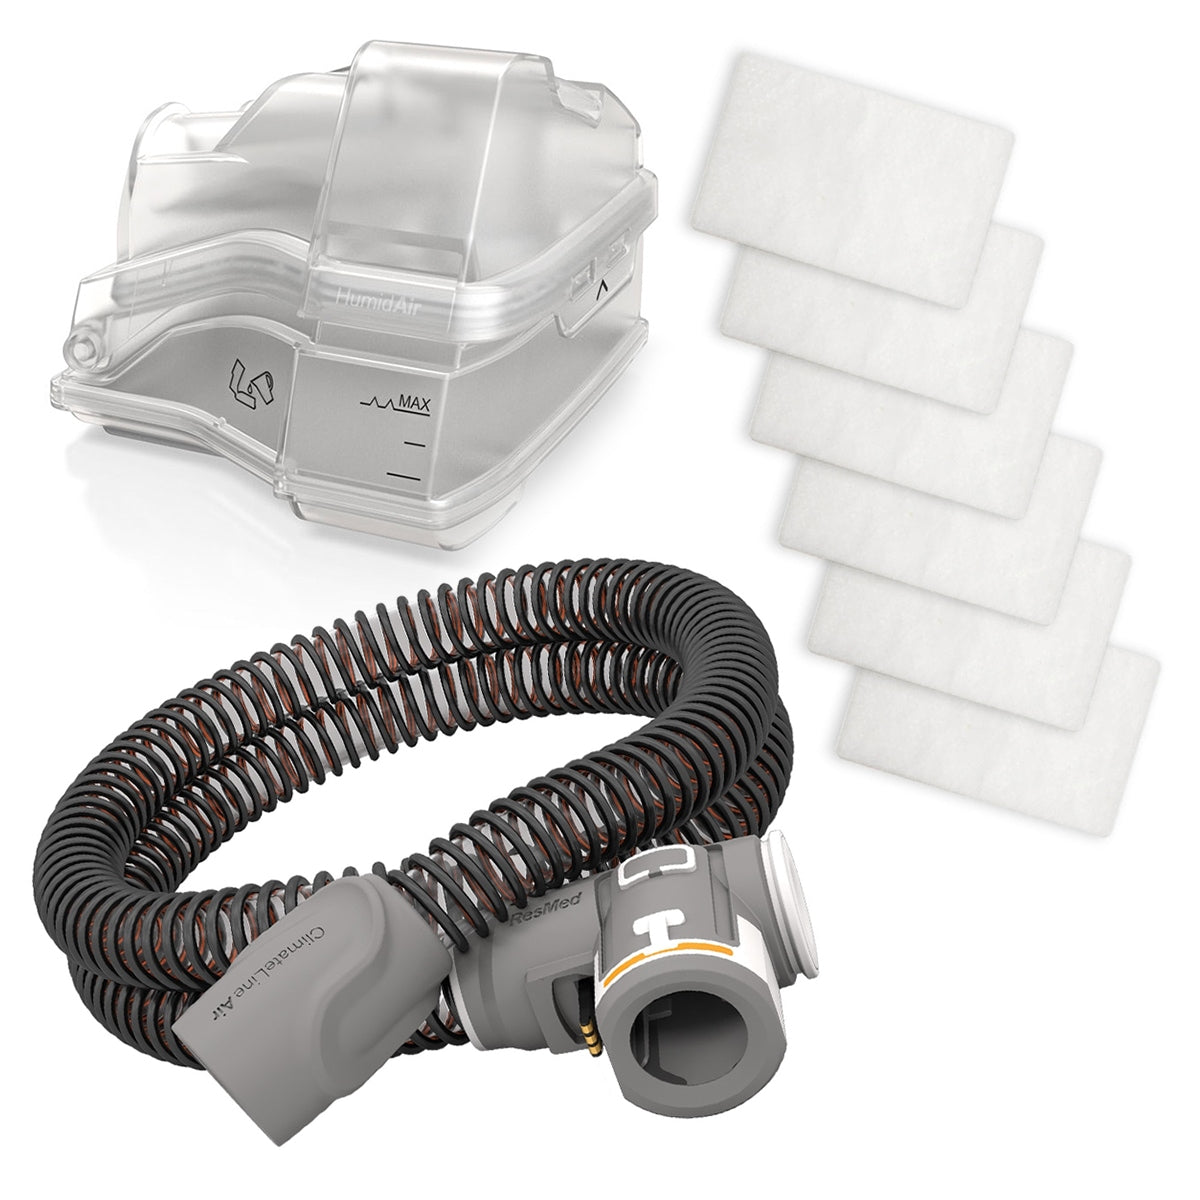 ResMed Resupply Package for AirSense 10 CPAP & AirCurve 10 BiLevel Machines